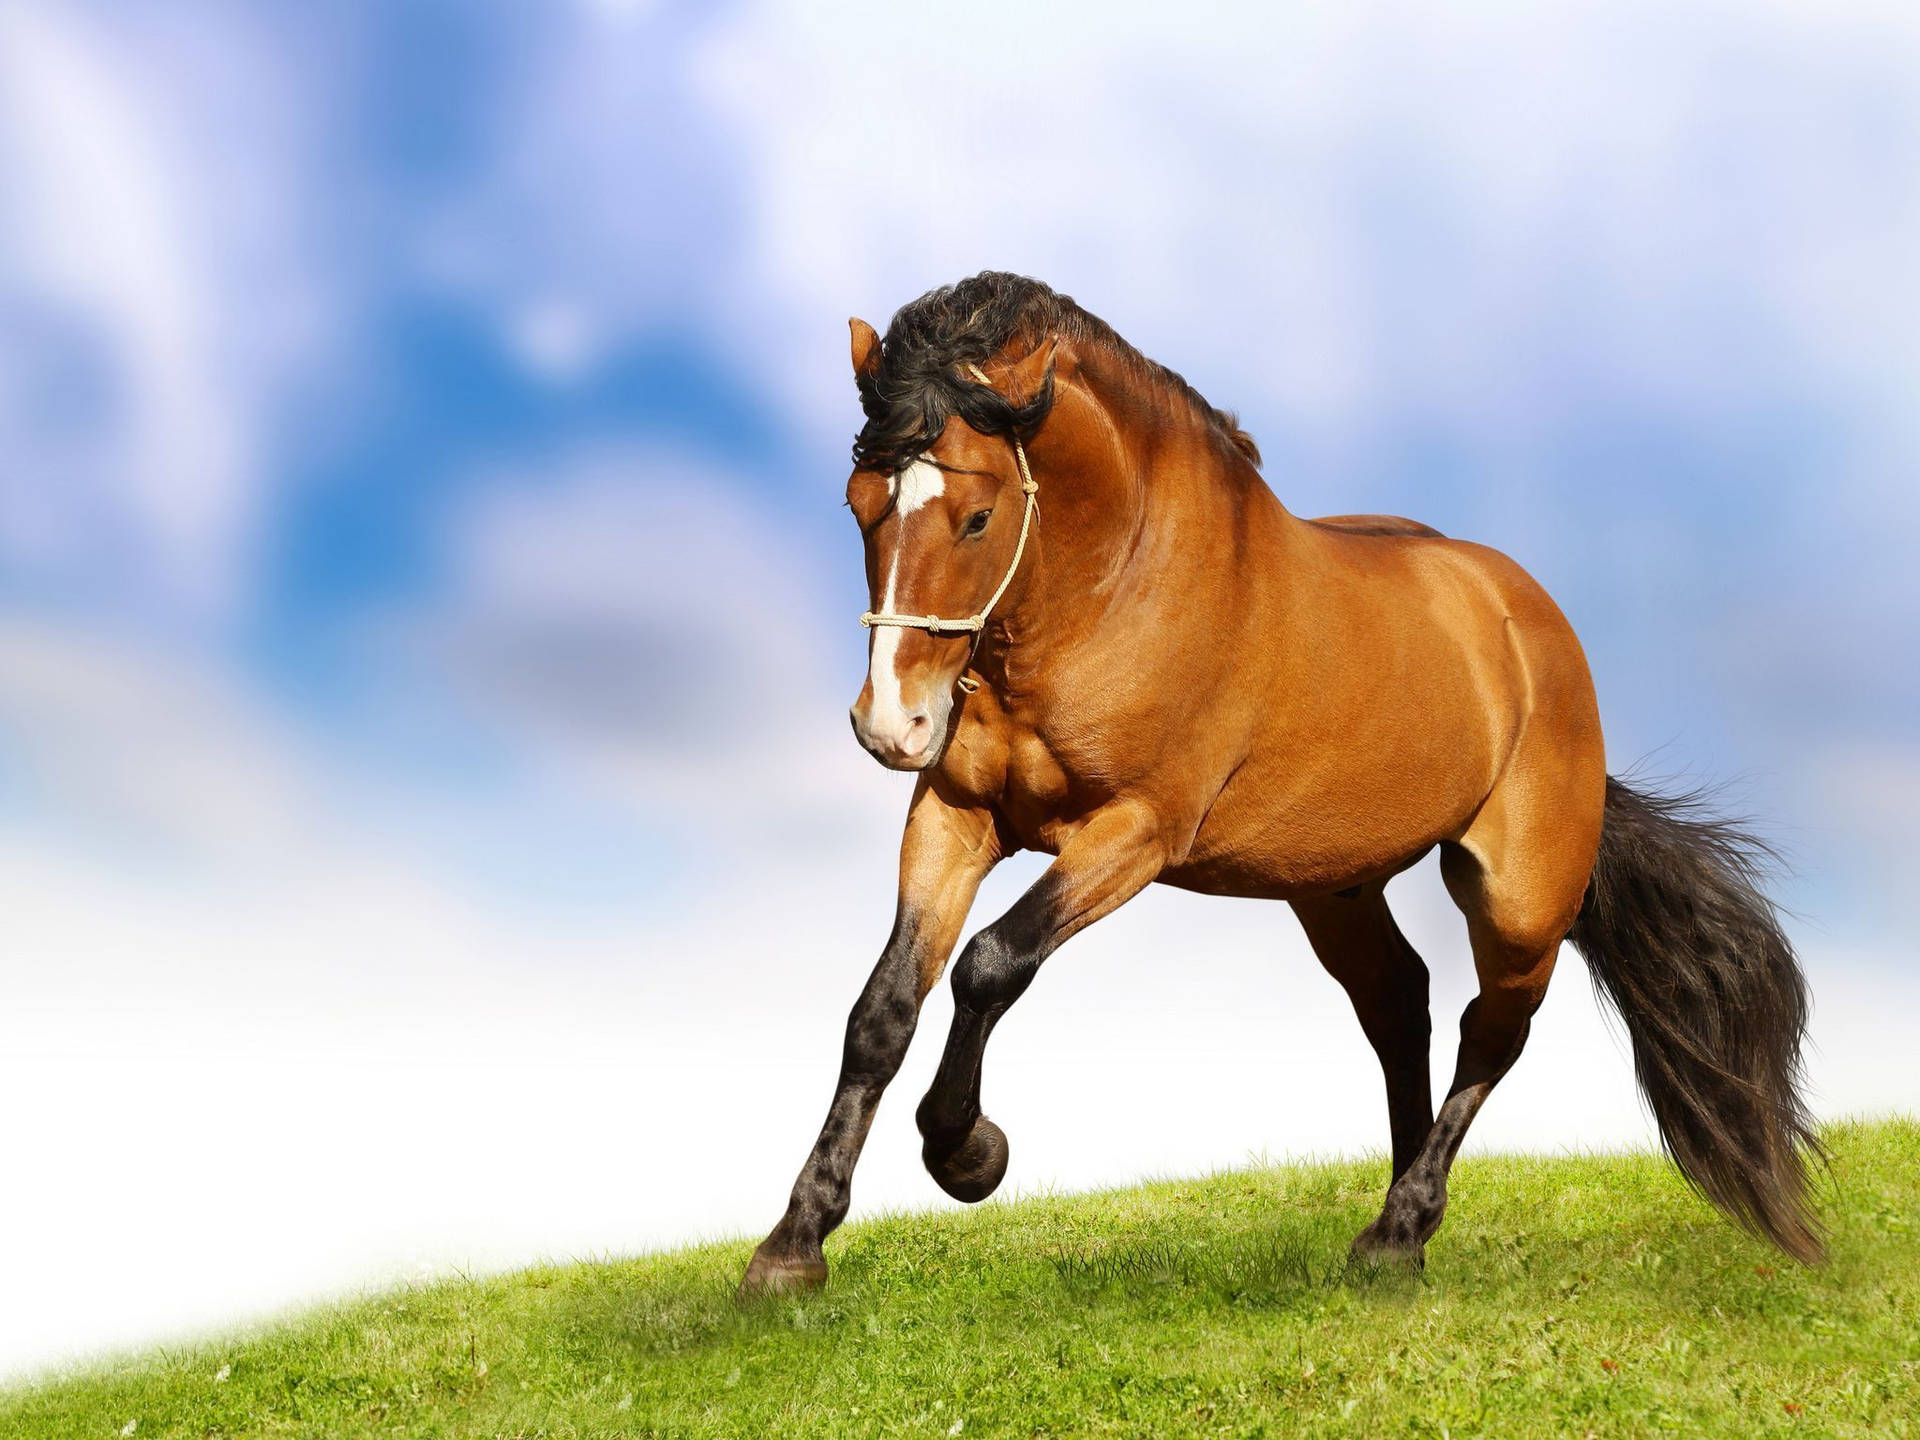 Cute Horse Running On Field Background